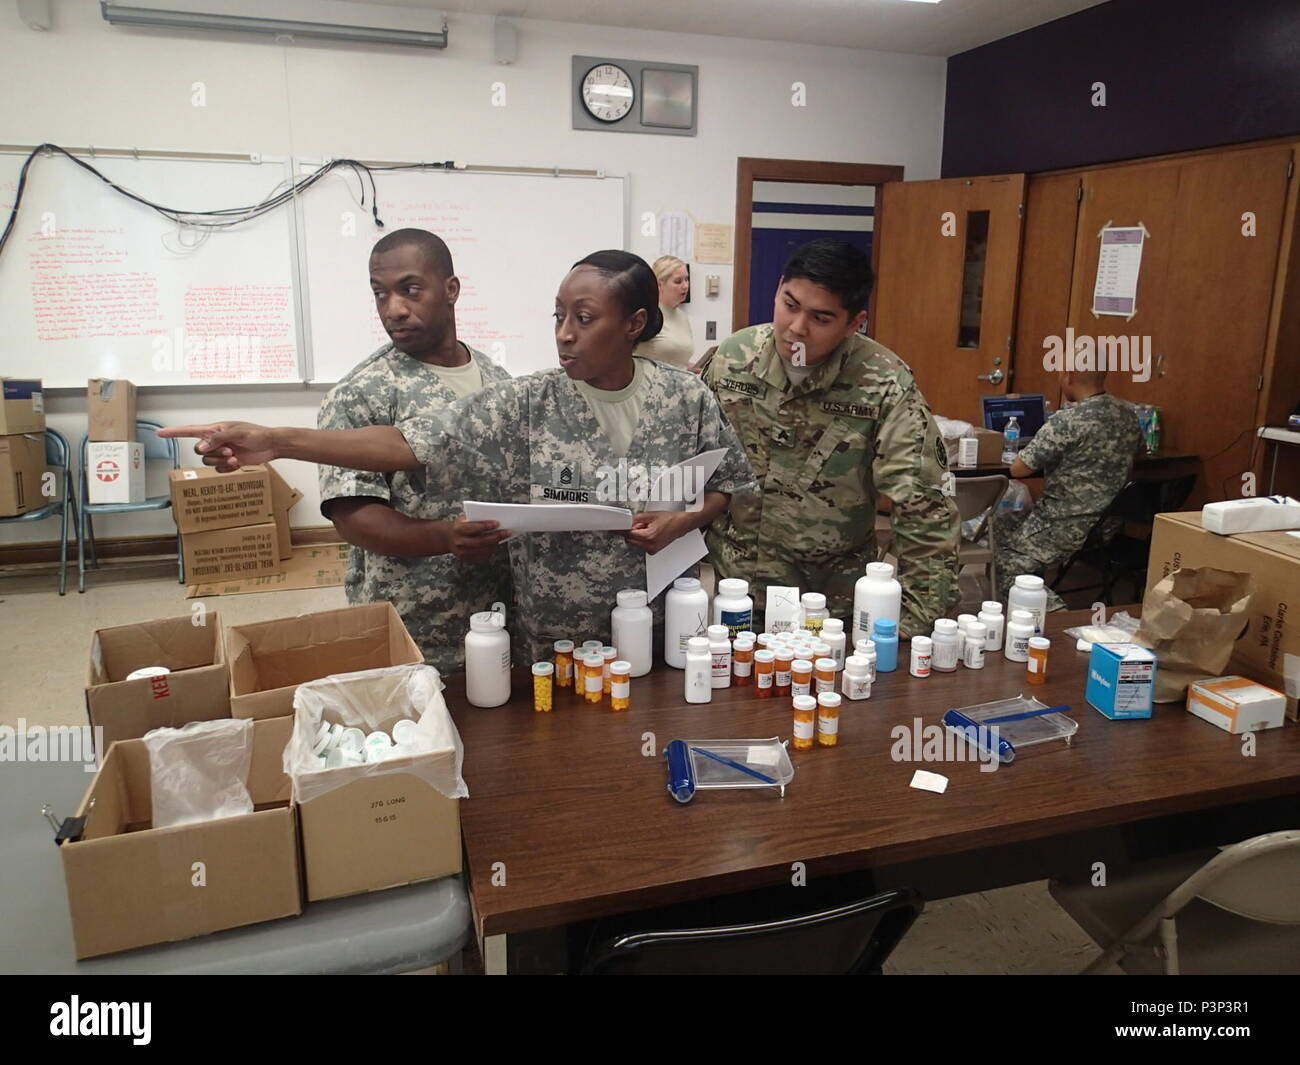 Sgt. 1st Class Carmen Simmons, a pharmacy technician, Staff Sgt. Tory Braxton, a wheeled vehicle mechanic, and Staff Sgt. Jordan Verdes, a patient administration specialist, all from Company Alpha, 48th Combat Support Hospital out of Fort Story, Va., count and log all the medications during the wrap-up of the Greater Chenango Cares Innovative Readiness Training event, July 24, 2016.  Greater Chenango Cares is one of the IRT events which provides real-world training in a joint civil-military environment while delivering world-class, no-cost medical, dental, optometry and veterinary care to the  Stock Photo